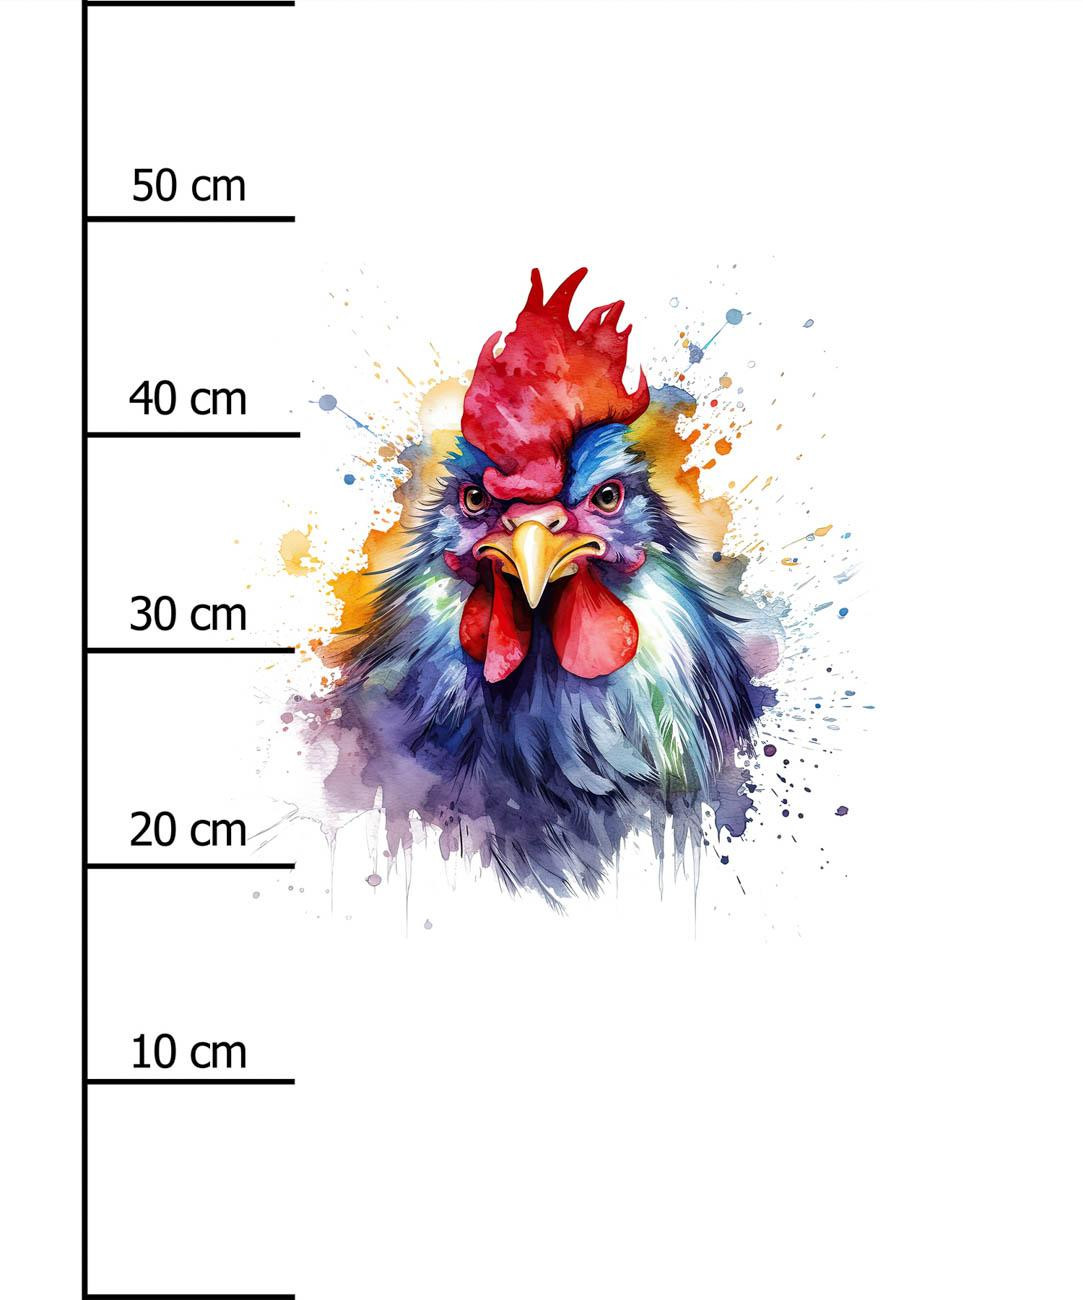 WATERCOLOR ROOSTER - PANEL (60cm x 50cm) SINGLE JERSEY